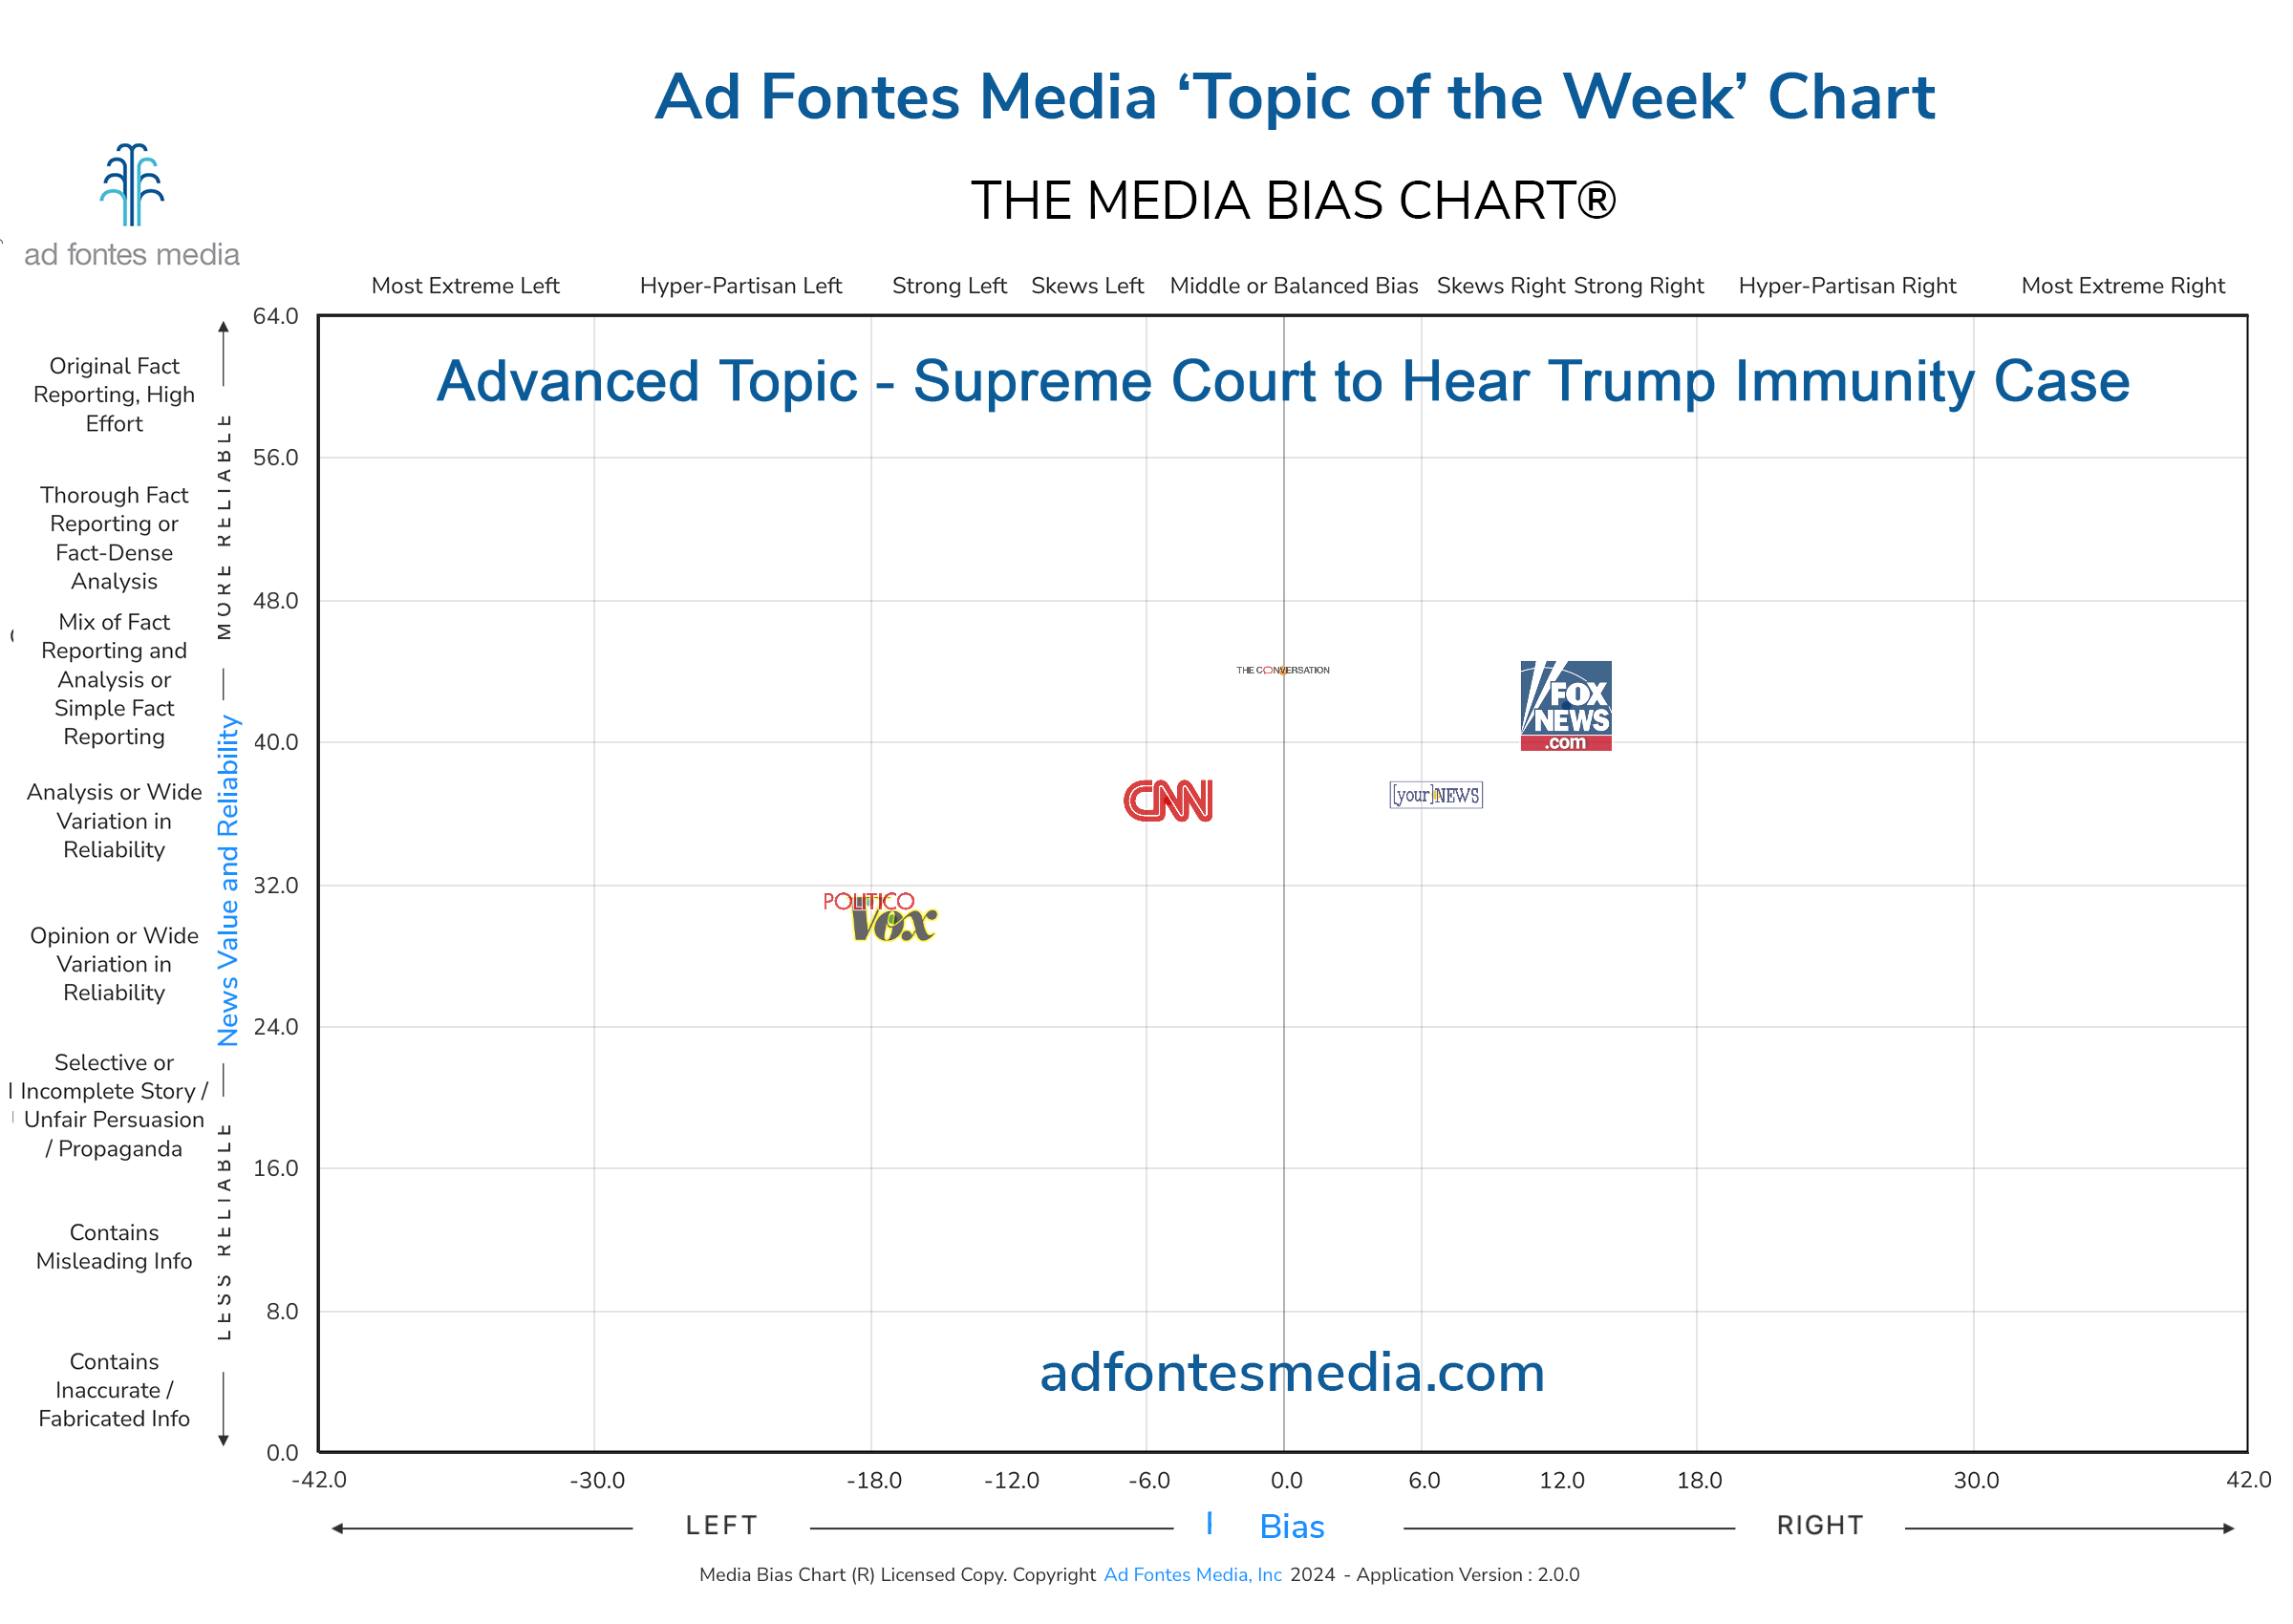 Scores of the Supreme Court to Hear Trump Immunity Case articles on the chart